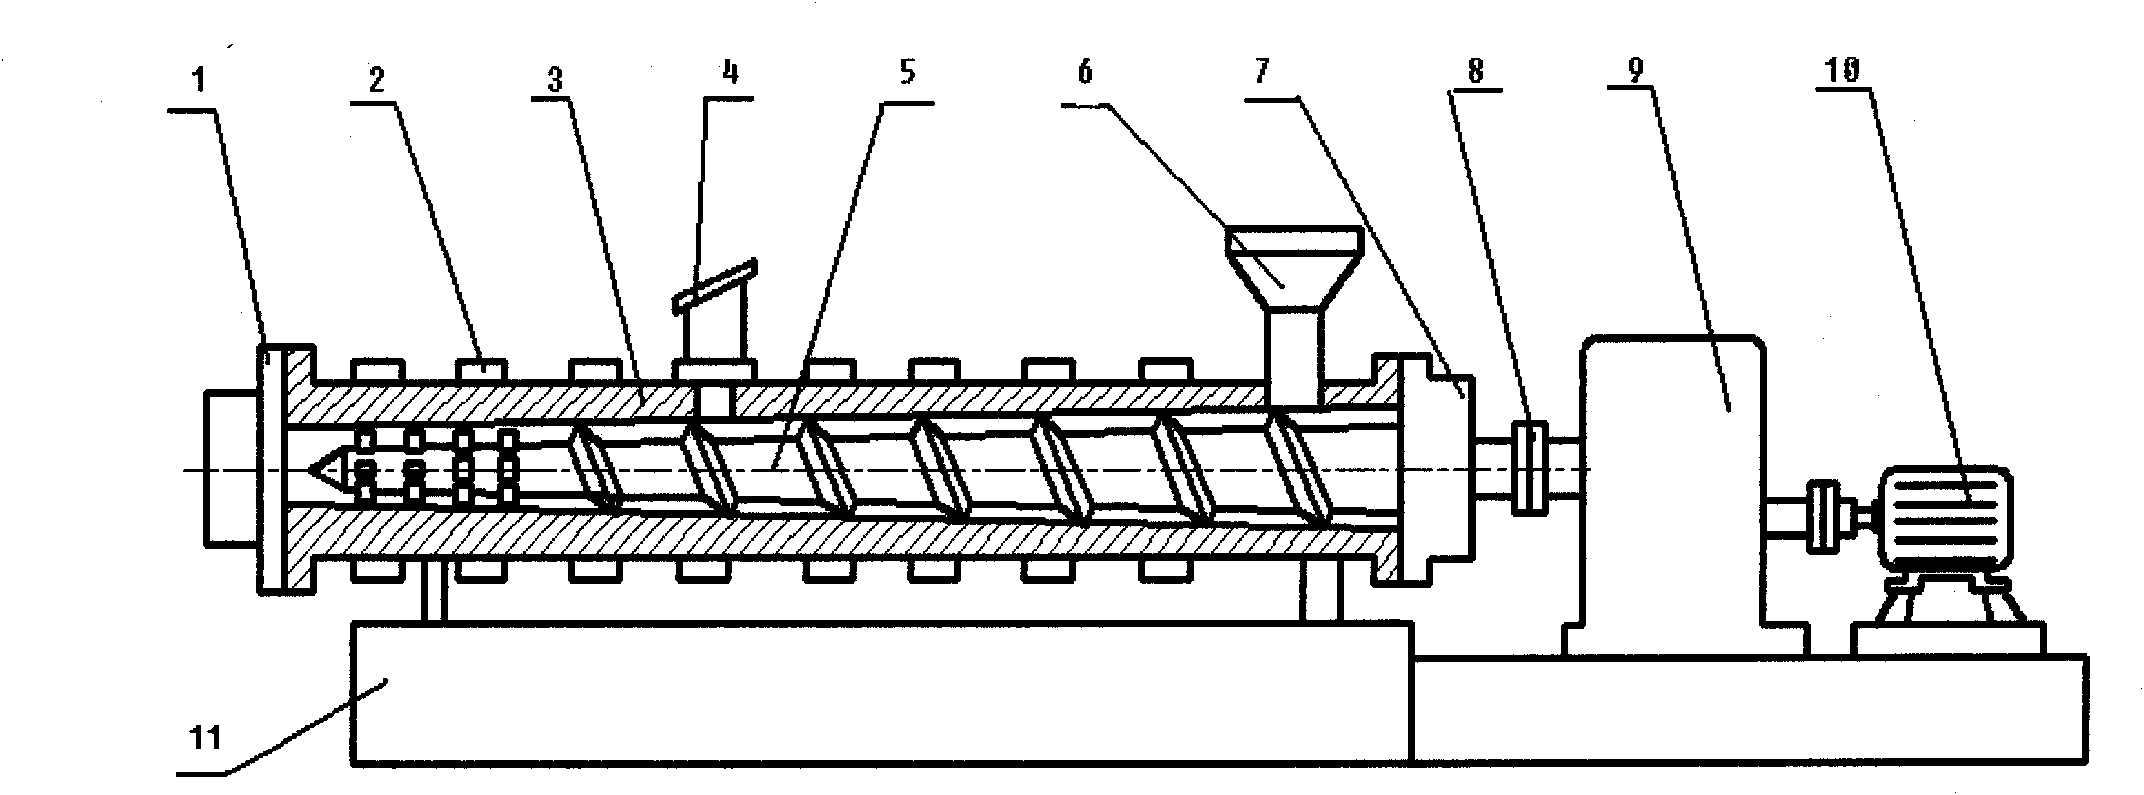 Differential-speed conical twin-screw extruder